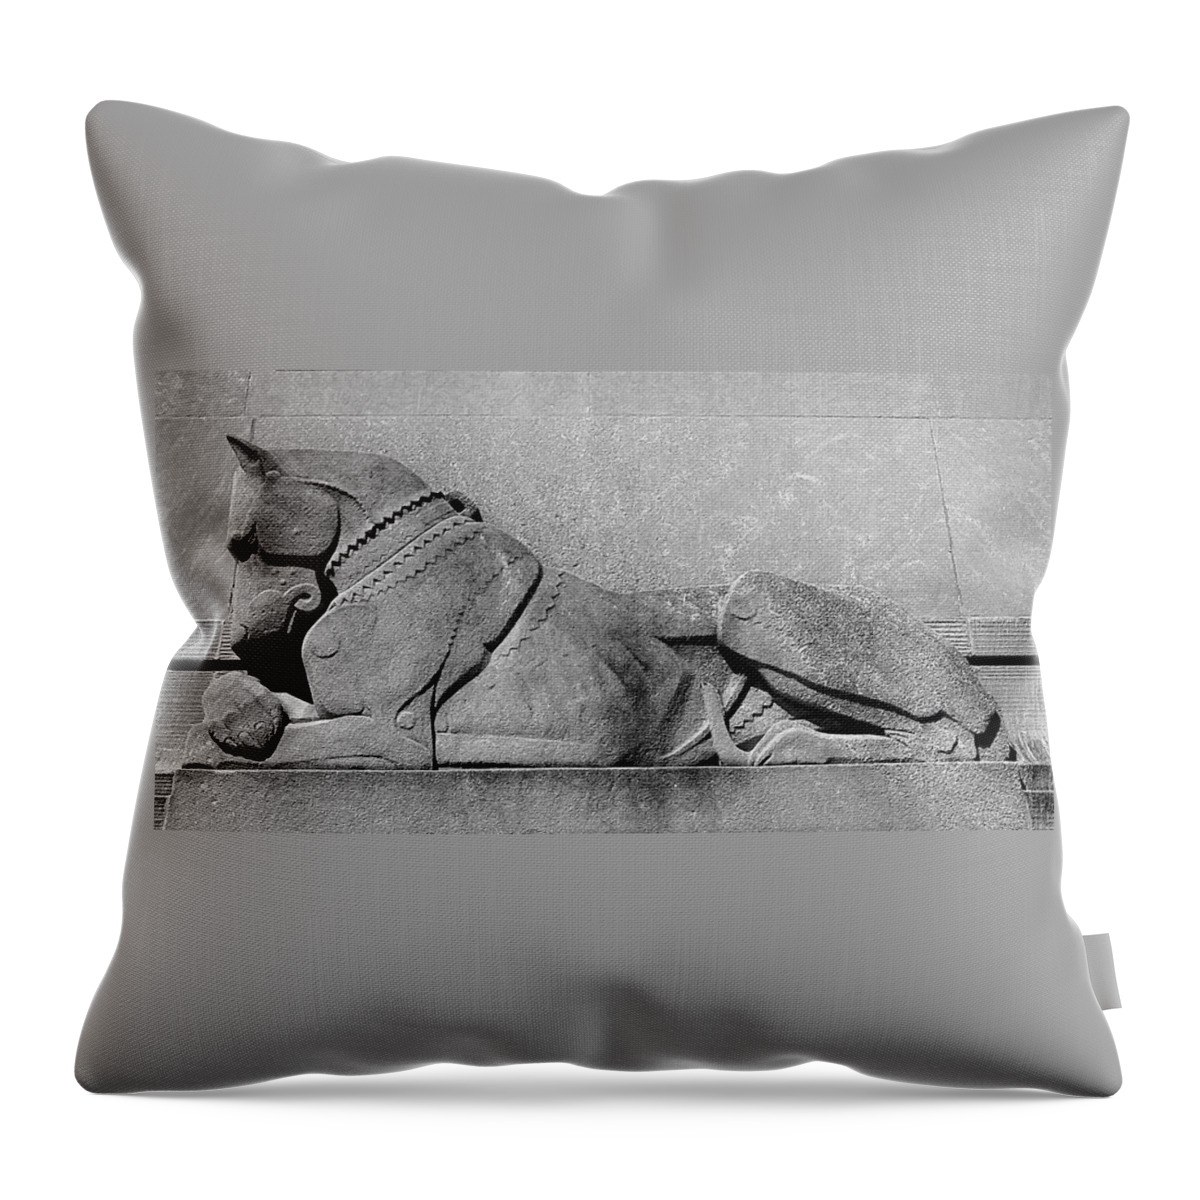 Digital Throw Pillow featuring the photograph Art Deco Great Dane by Richard Ortolano